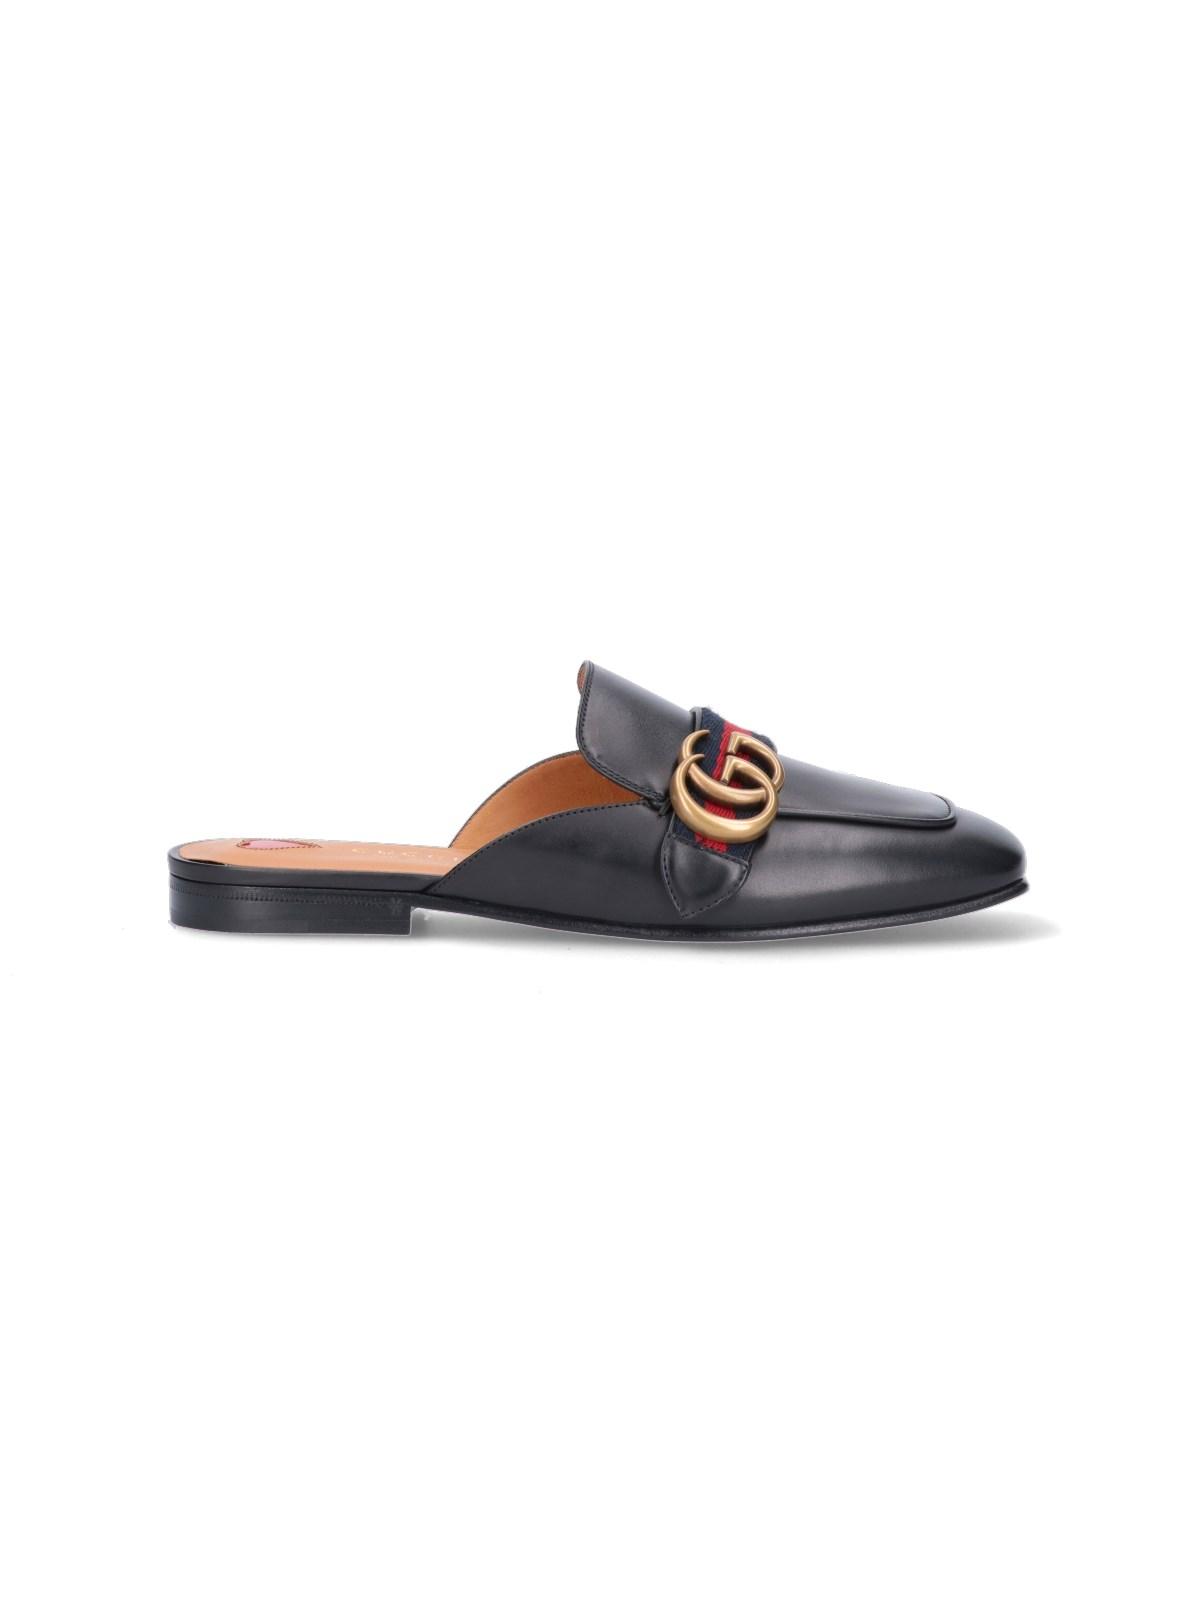 Gucci "Gg Marmont" Slippers in Black | Lyst